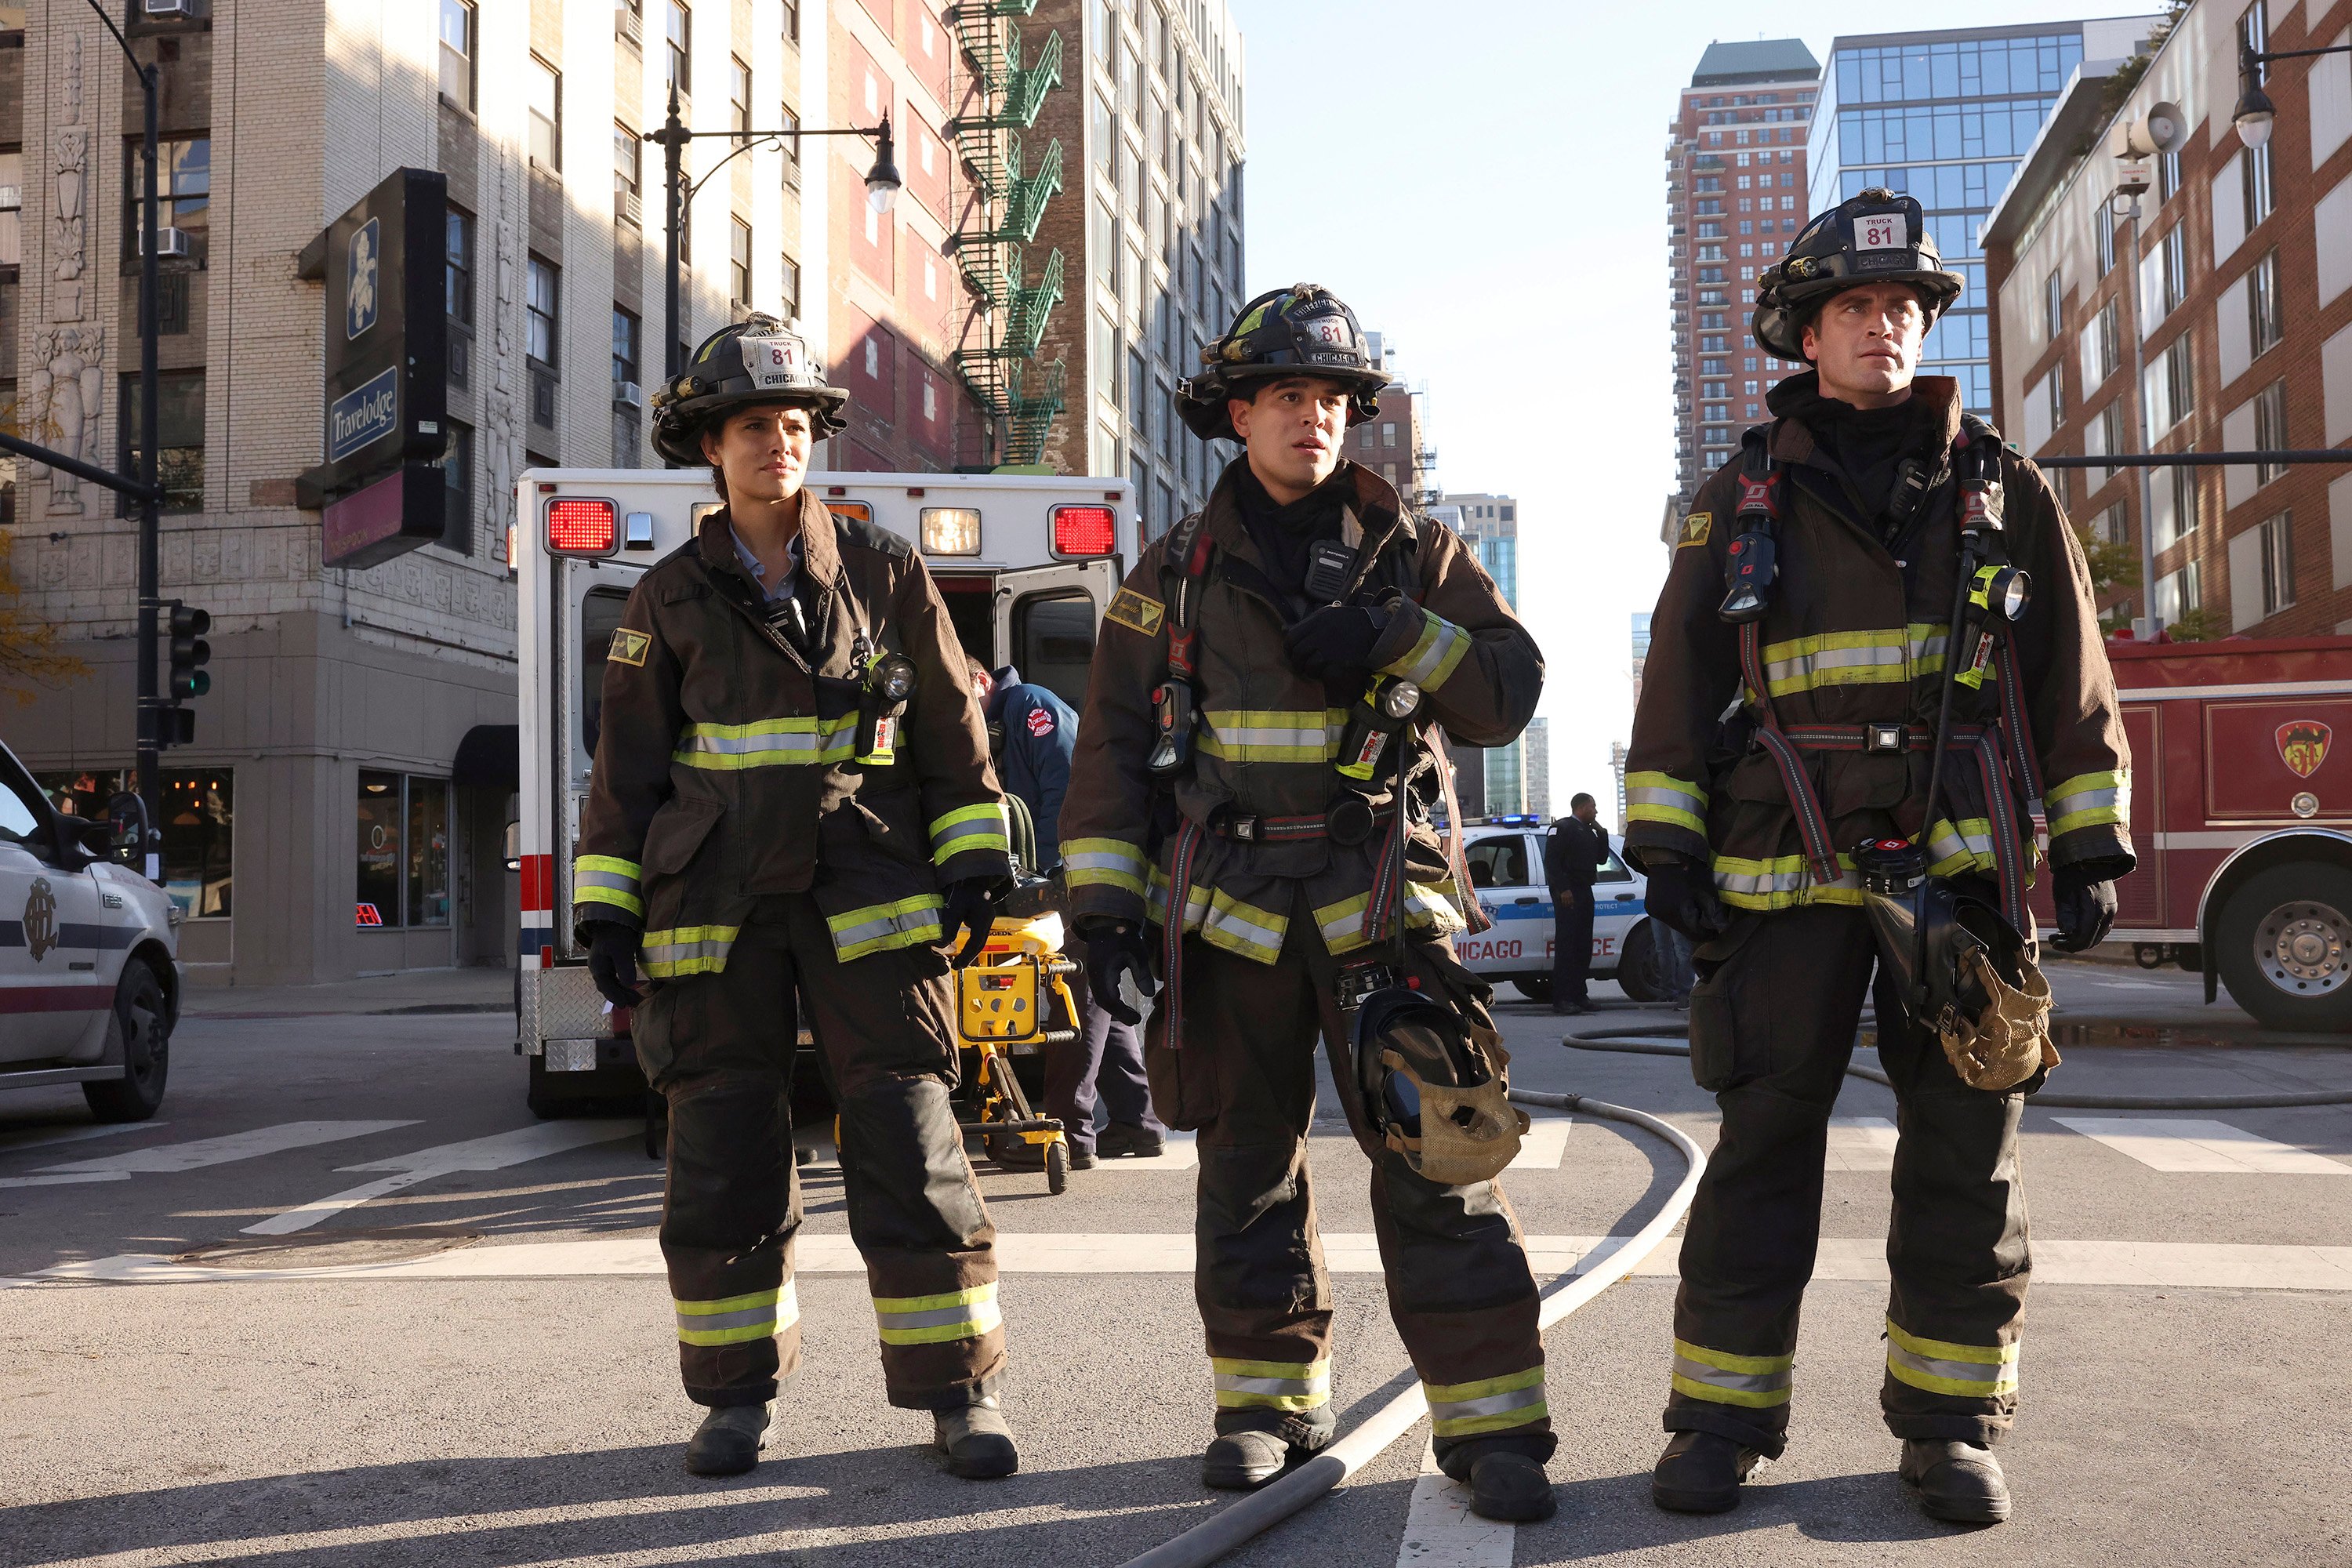 The cast of Chicago Fire stands together during an episode.